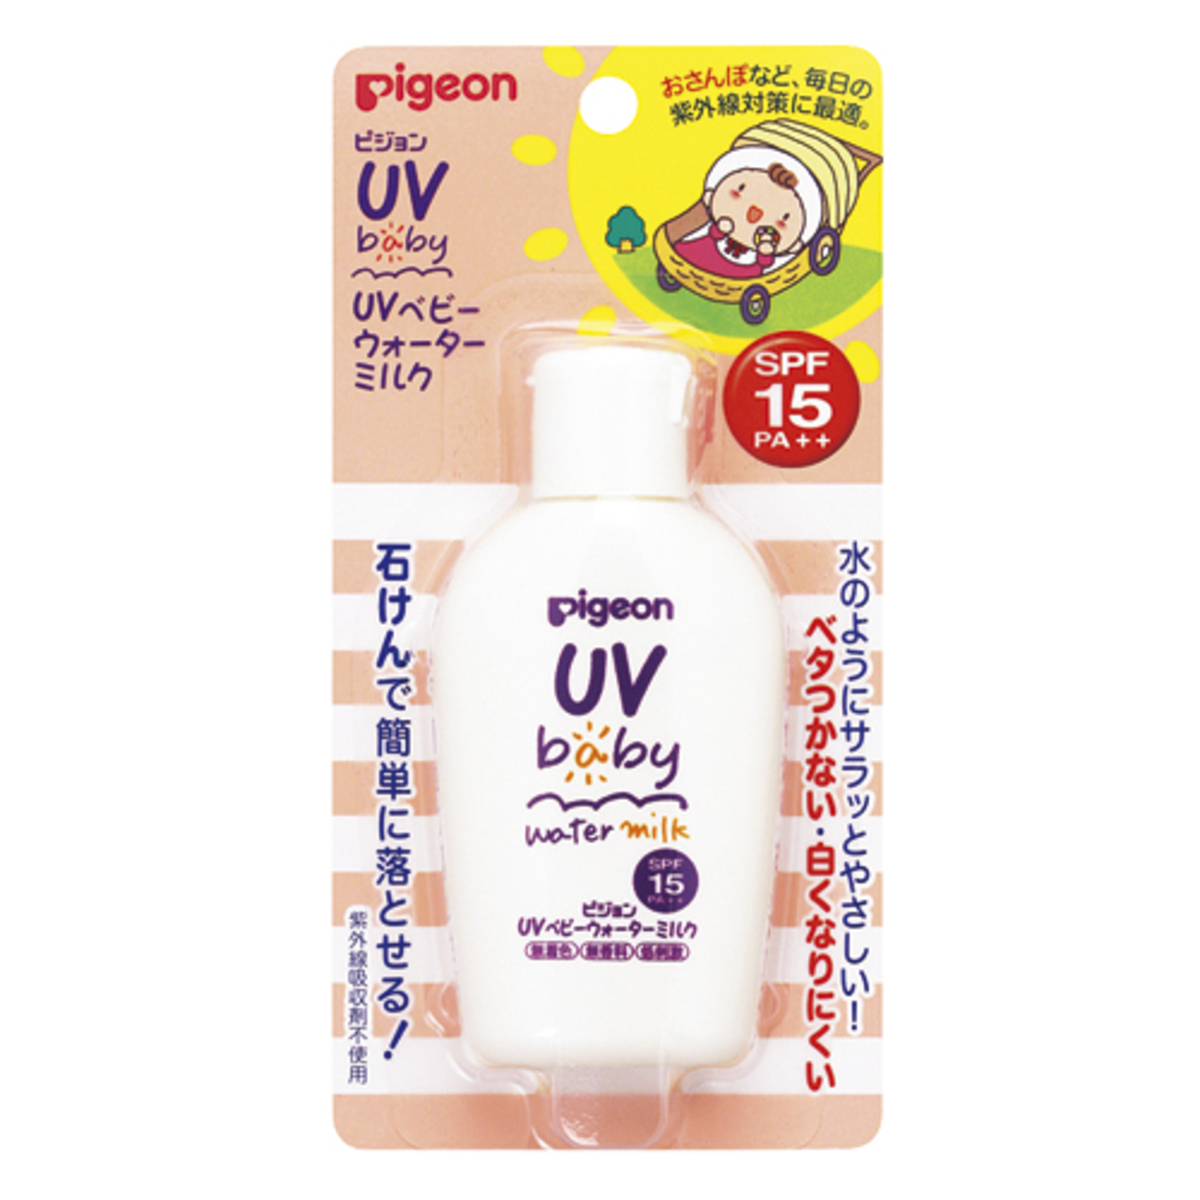 UV Baby Water Milk (SPF15 PA++) 60g (Parallel Import Product)